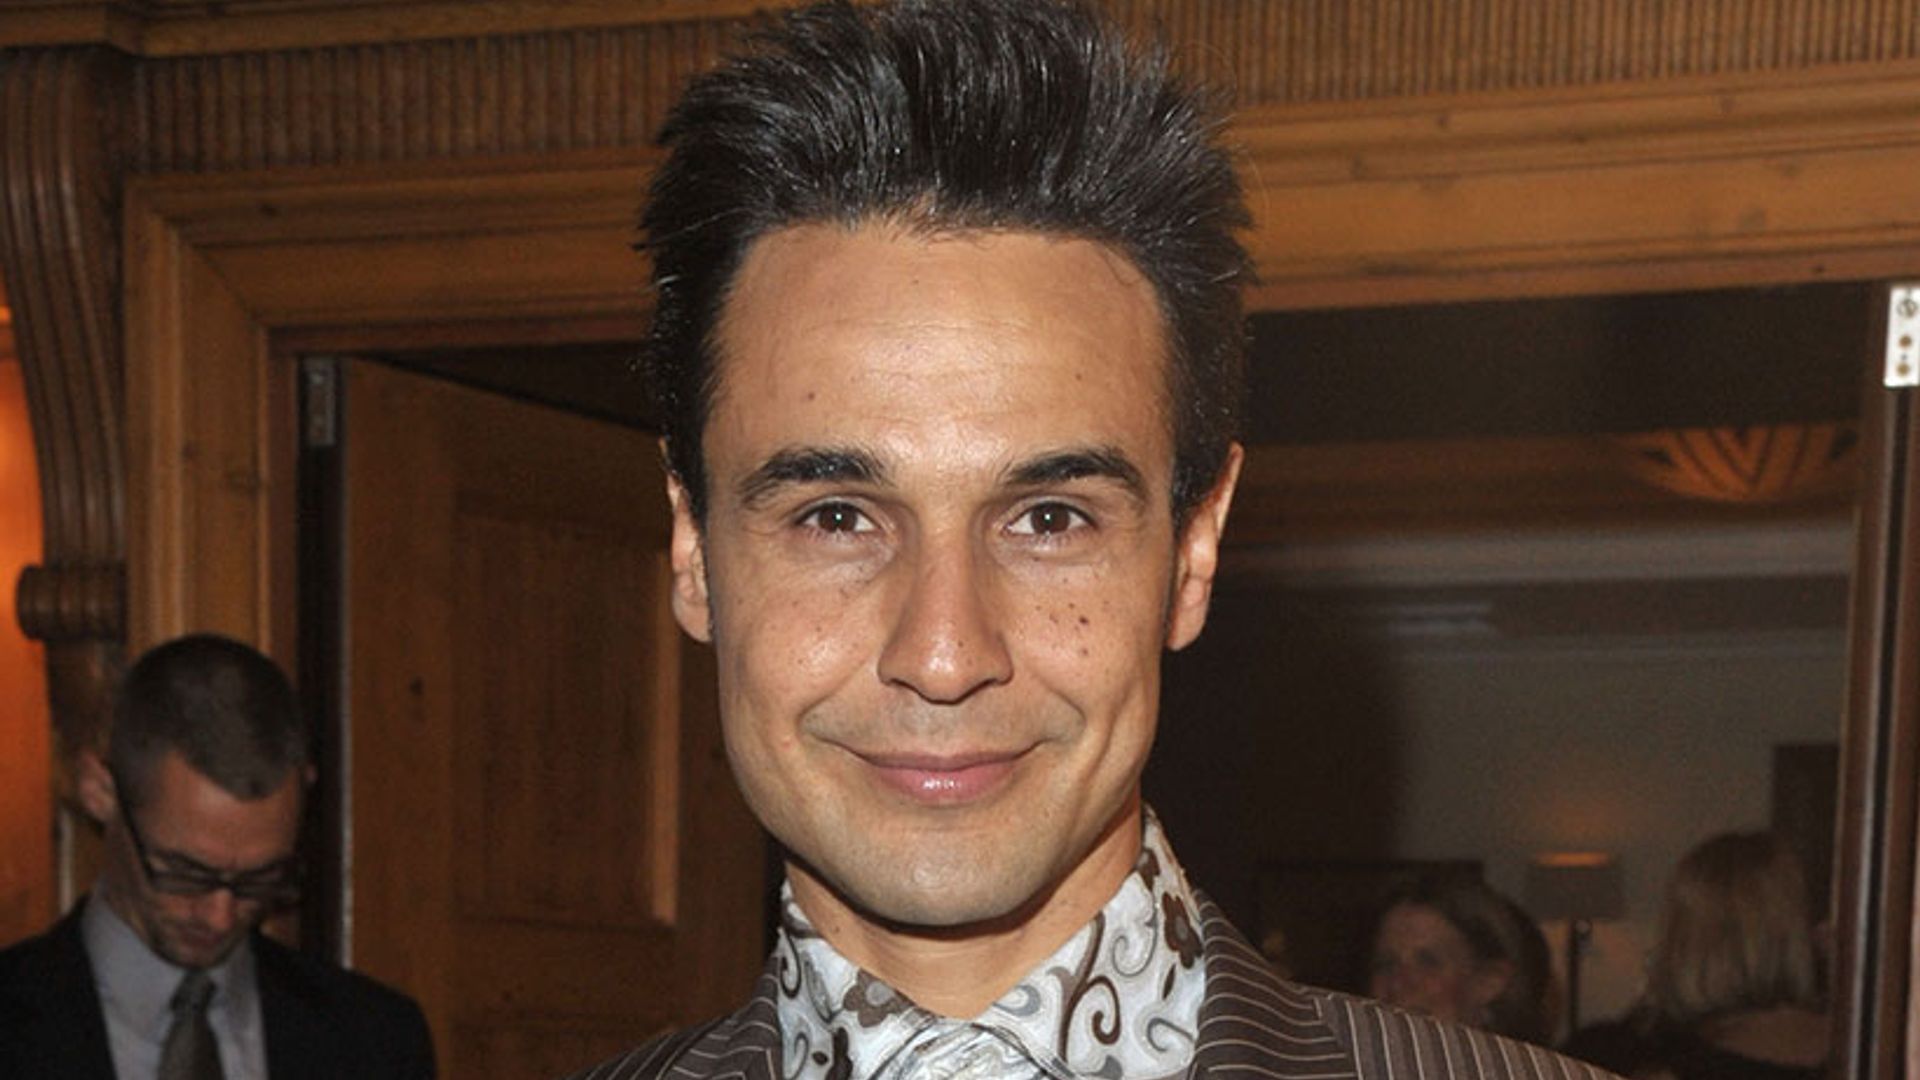 X Factor star Chico rushed to hospital after suffering a stroke at the age of 47